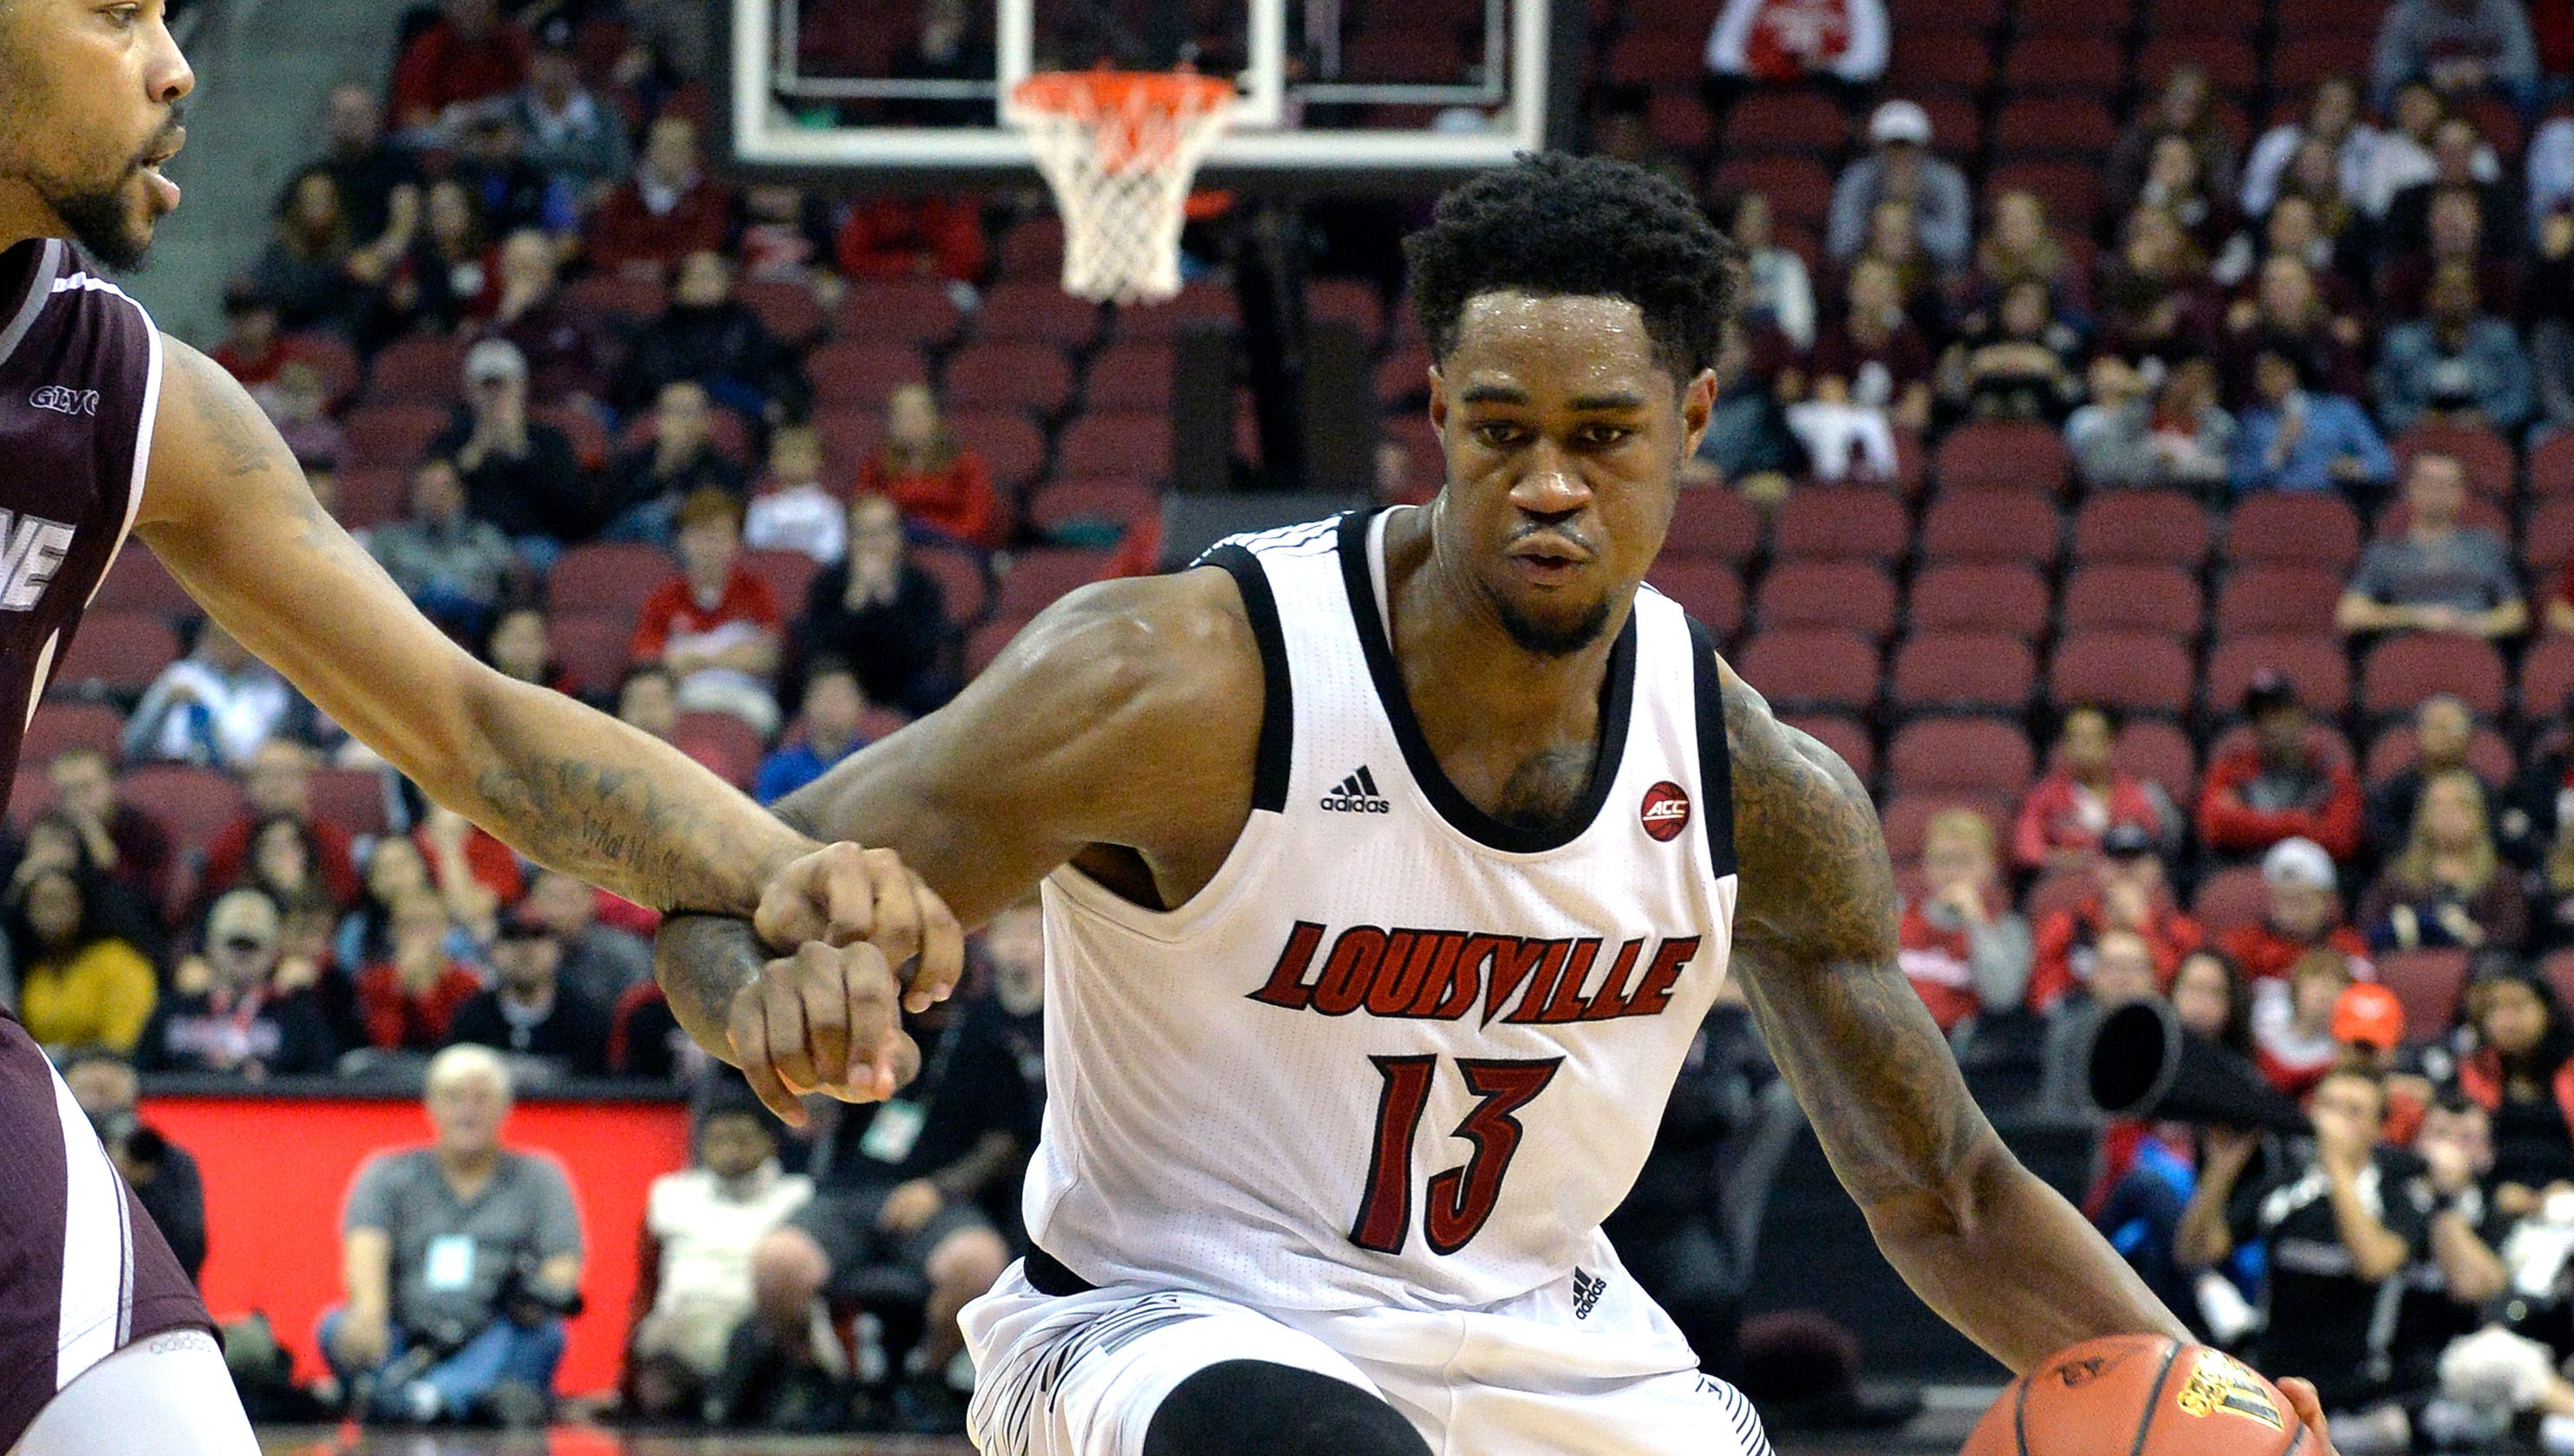 Louisville basketball: What latest scandal means for U of L